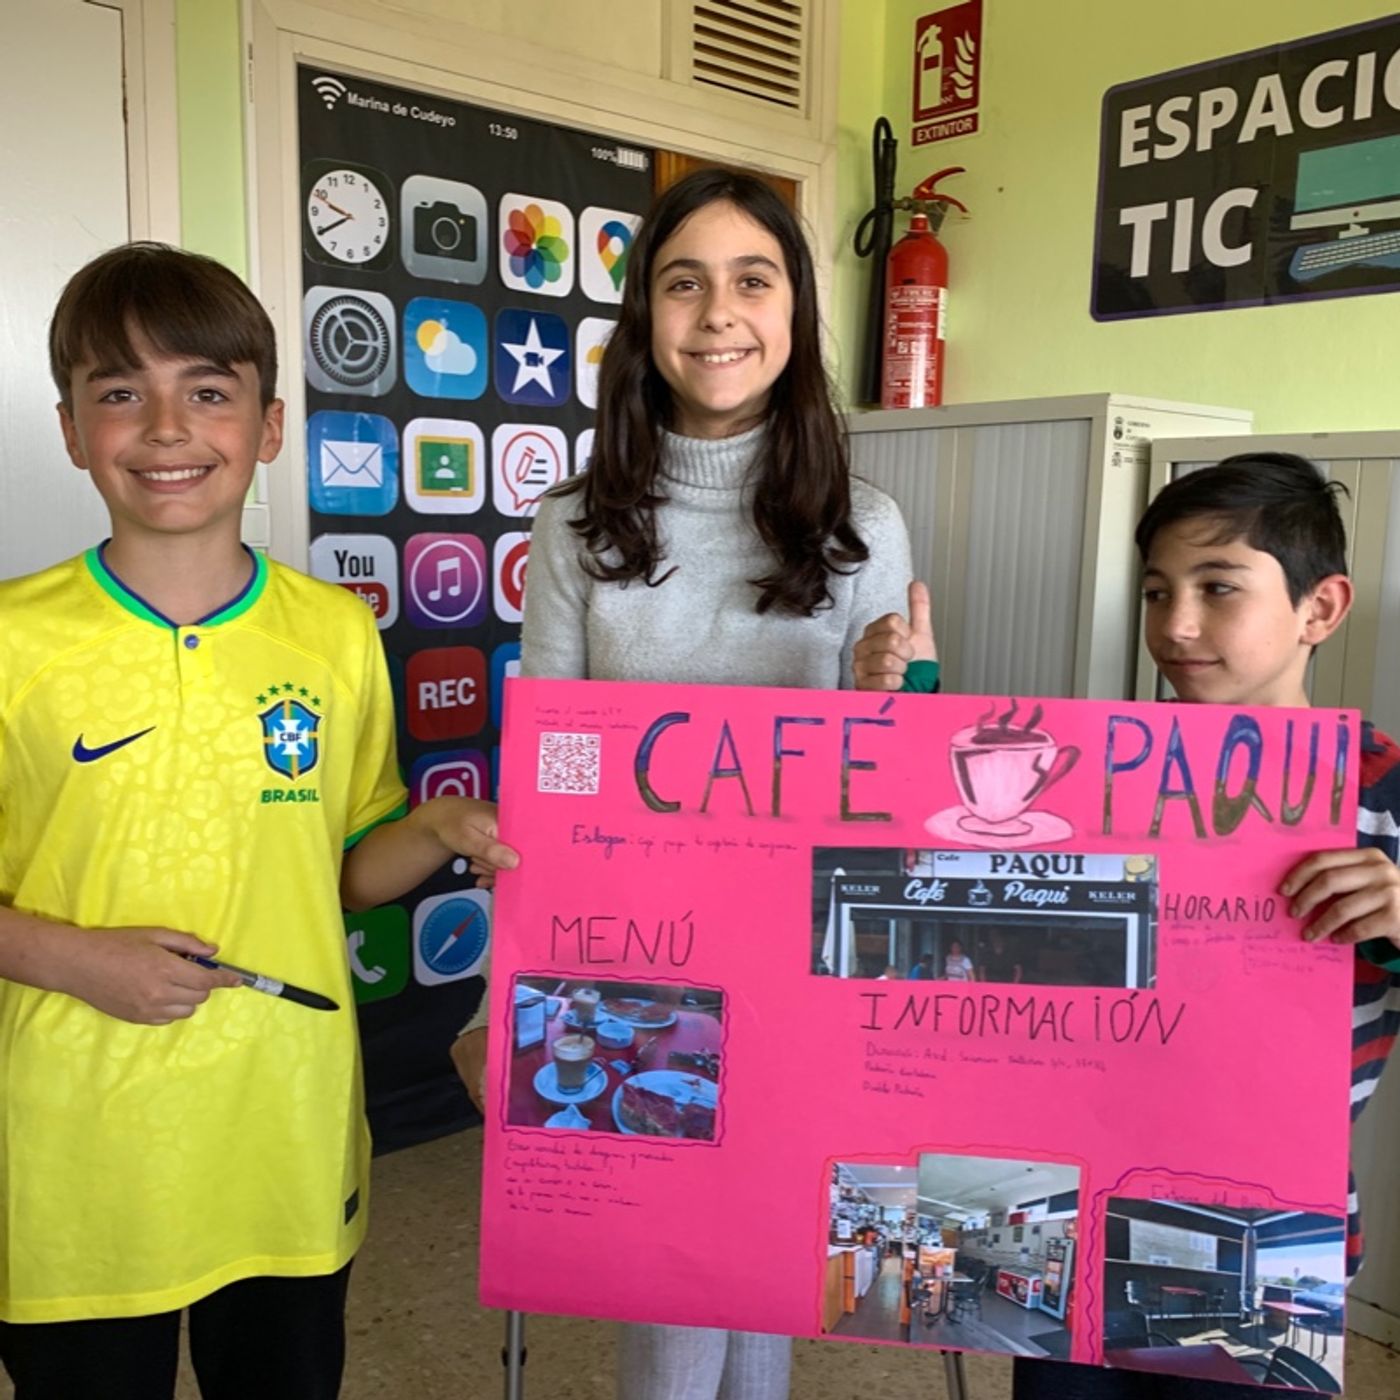 CAFE BAR PAQUI in Pedreña - Commercial by Danny, Luke and Sophie